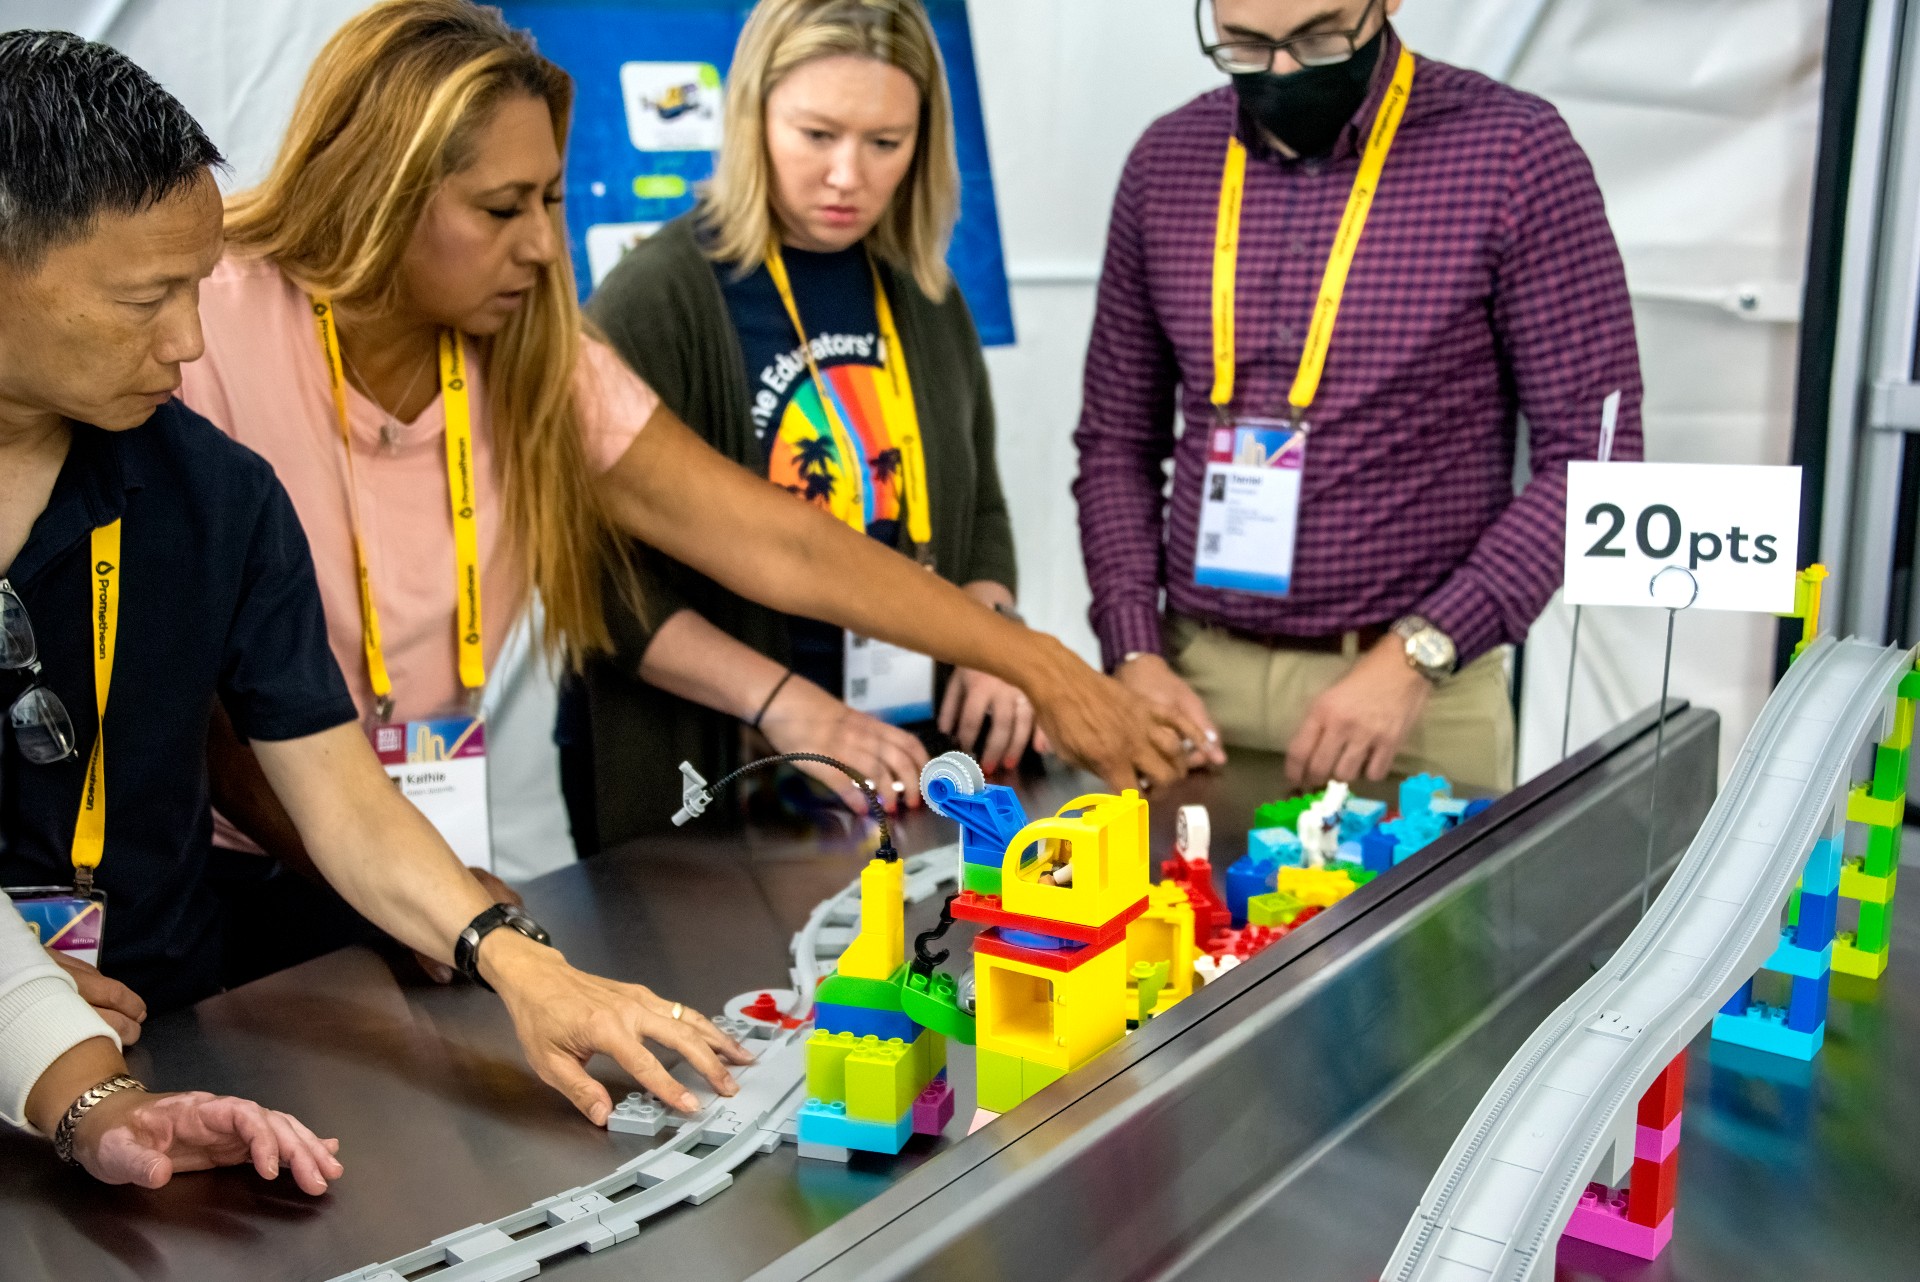 Visitors participate in a hands-on Lego experience at Kennedy Space Center.